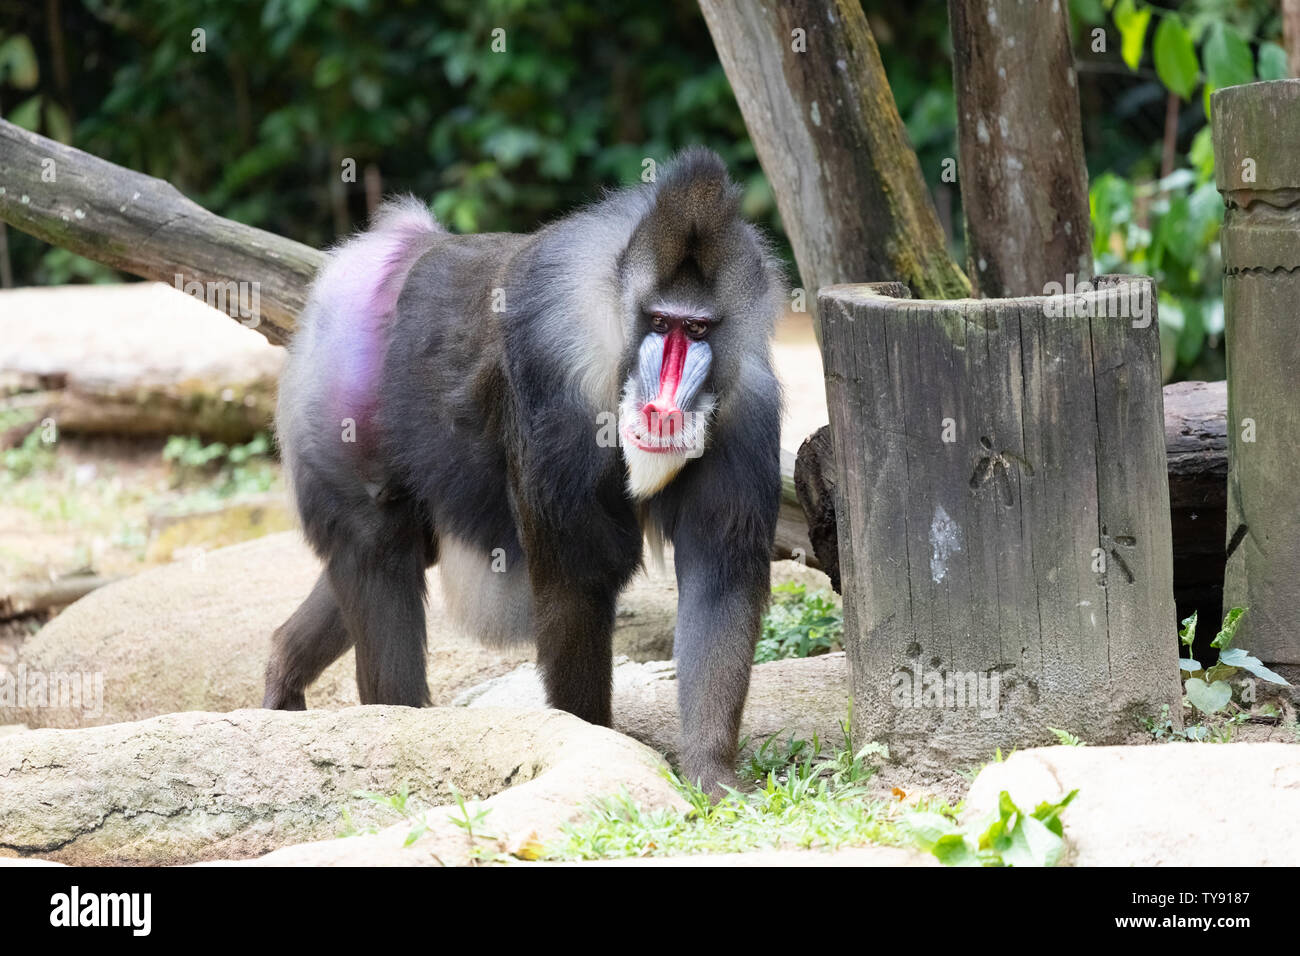 Mandrill is a primate of the Old World monkey family. Stock Photo